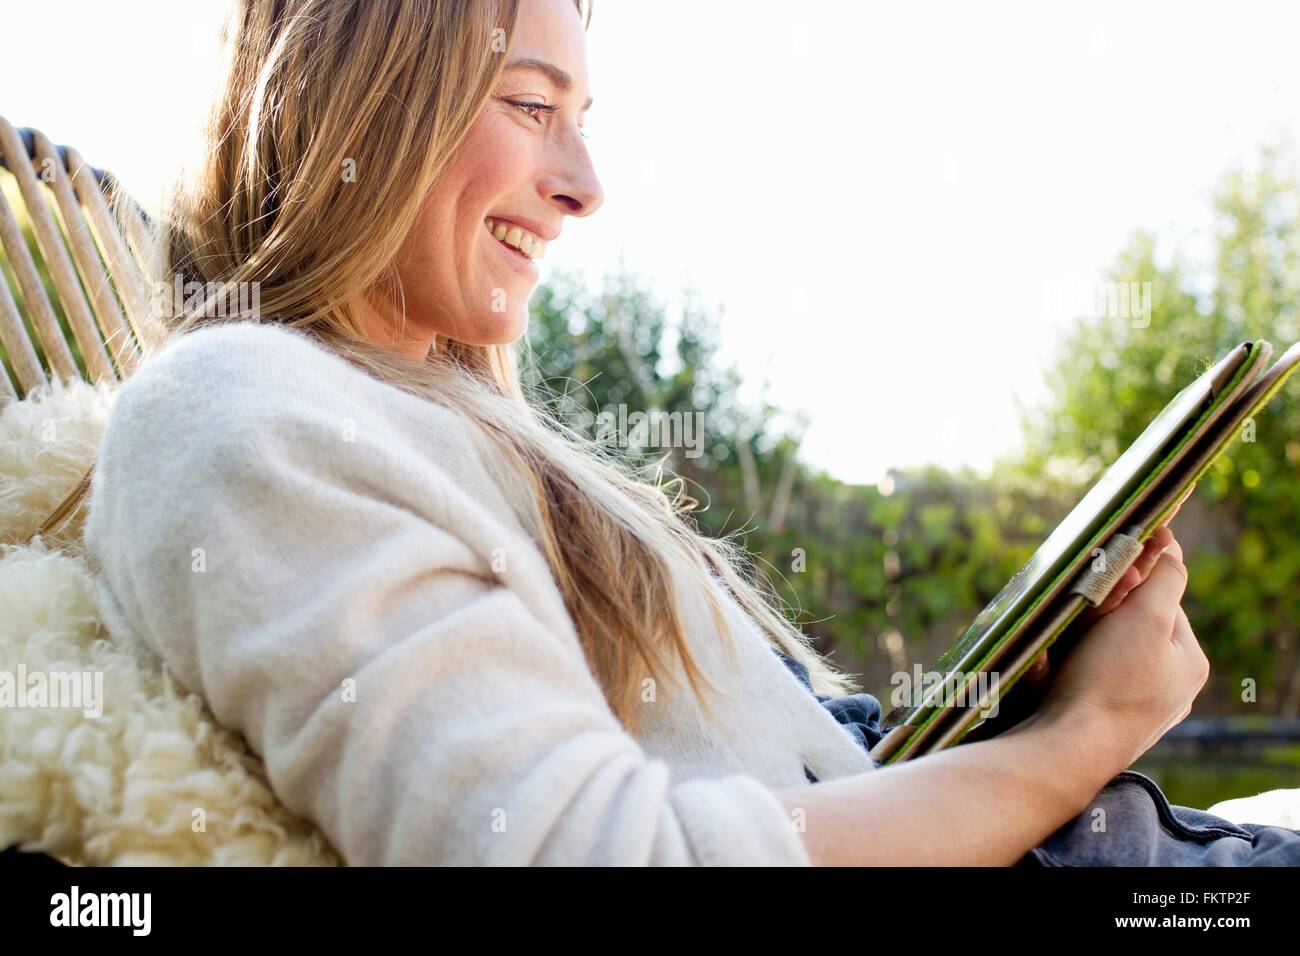 Portrait   mid adult woman using digital tablet, smiling Stock Photo